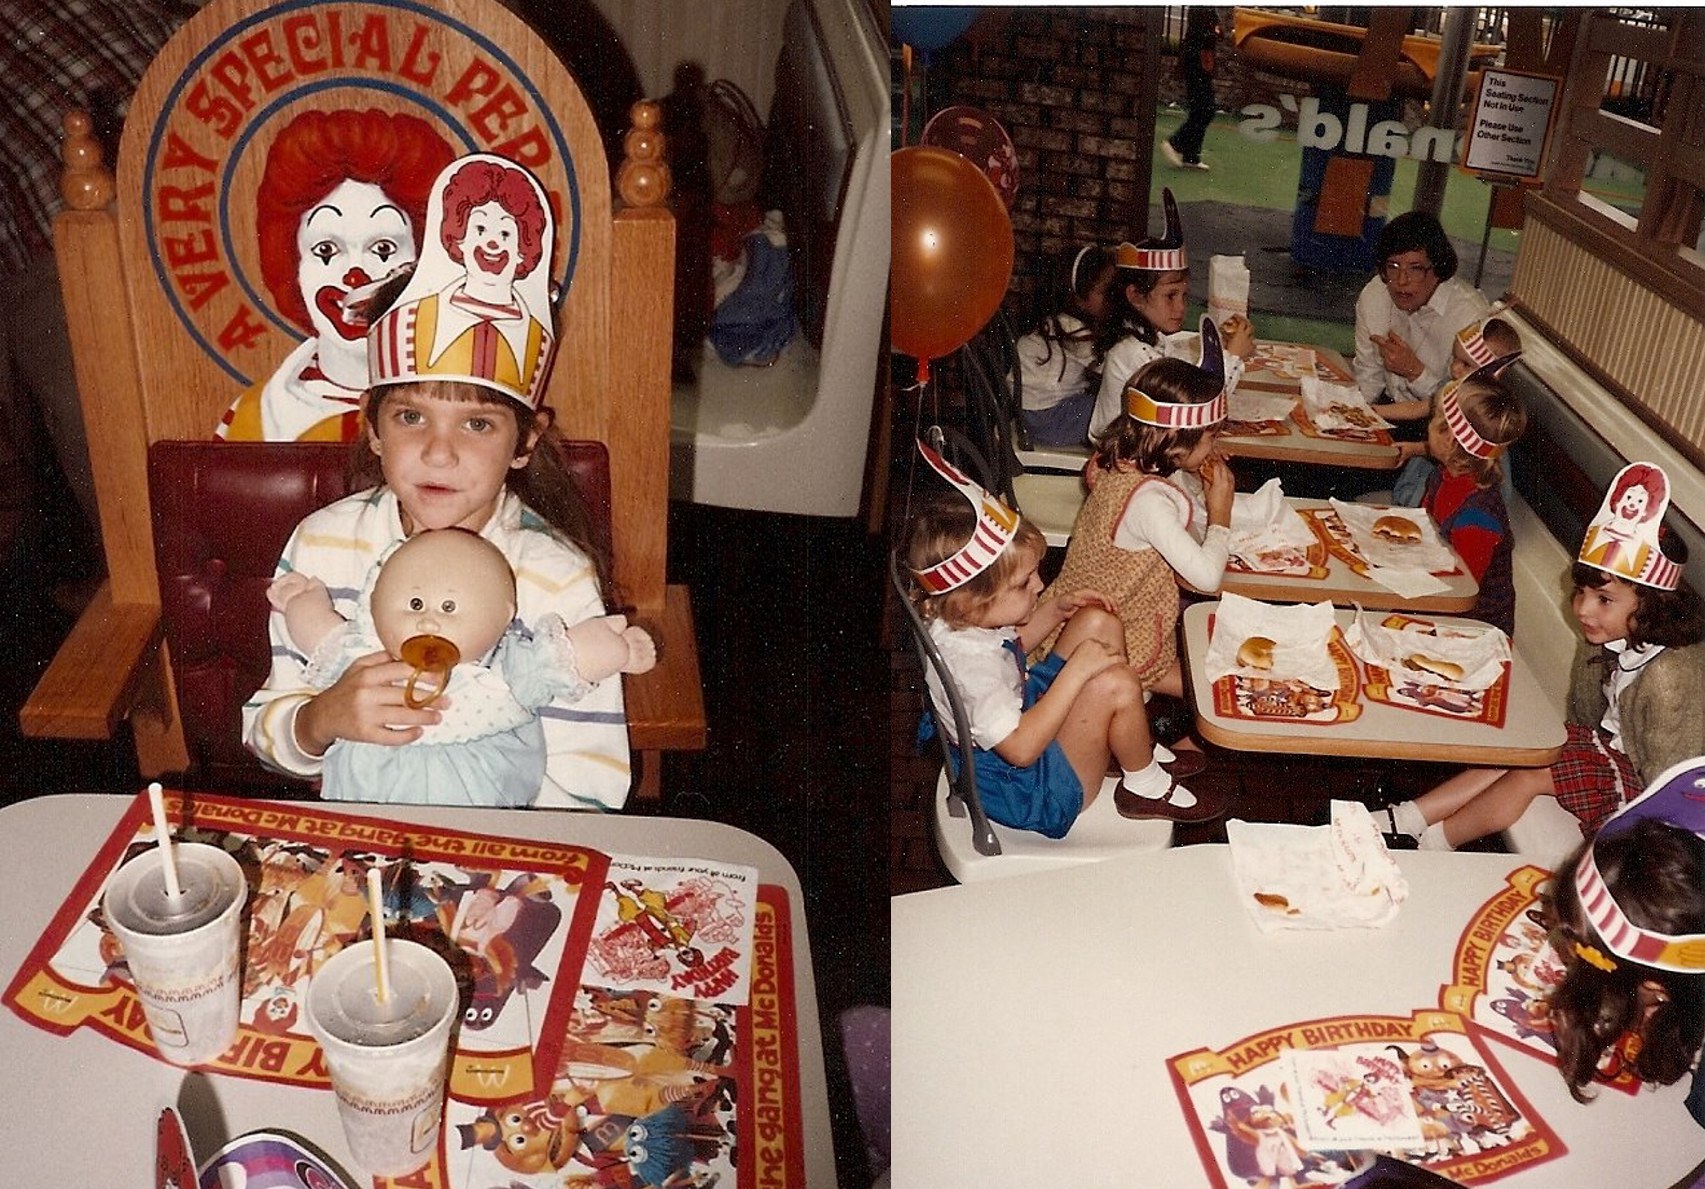 Everyone had McDonald's parties (and cabbage patch kids)